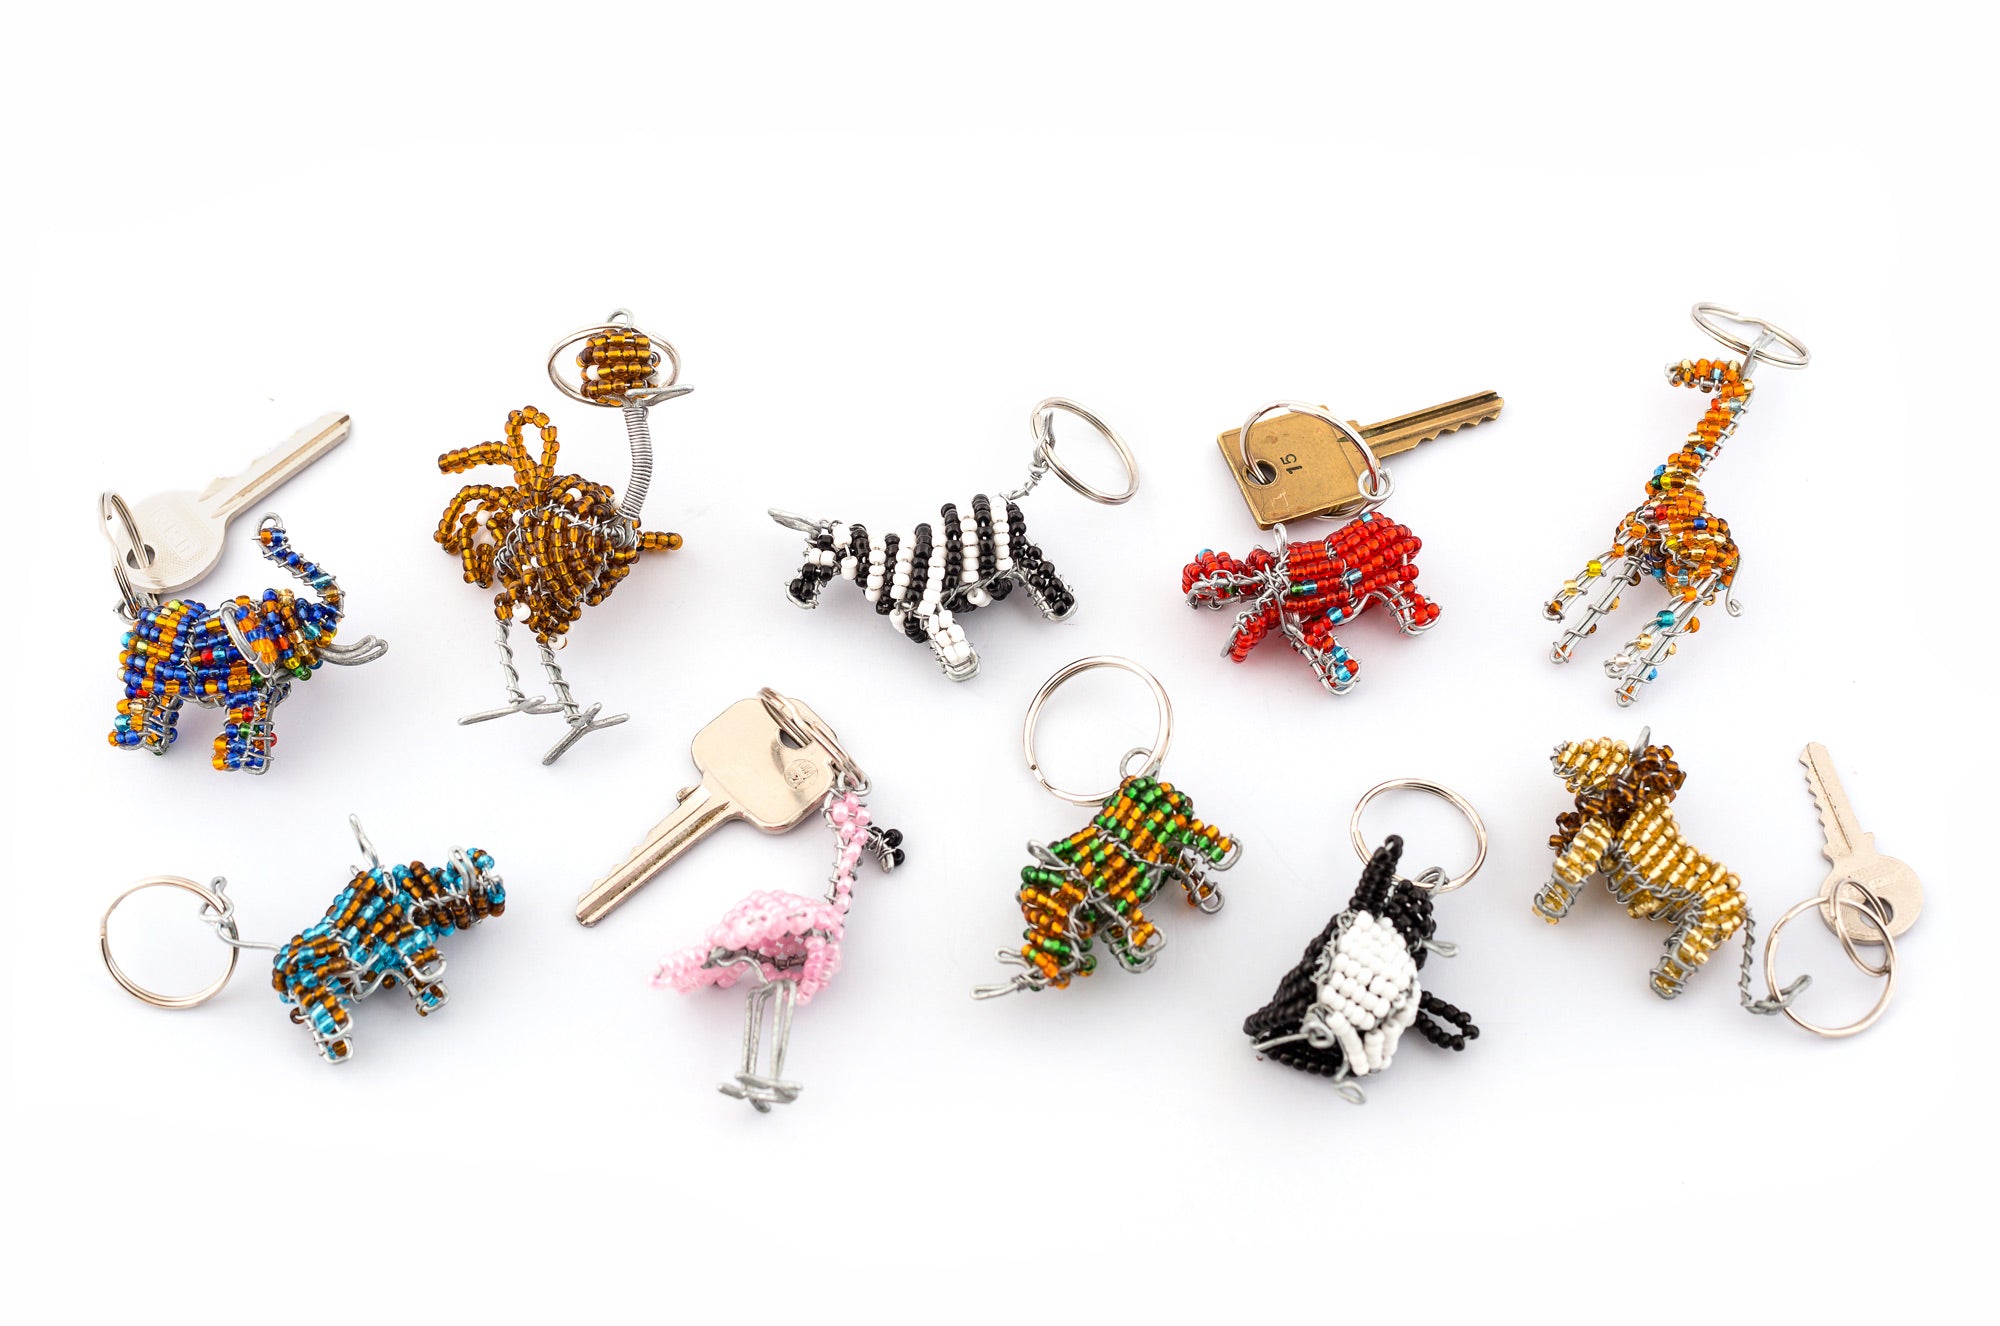 Group shot of African Animal key chains. All handmade in colorful selection of beads.  Elephant, ostrich, zebra, hippo, giraffe, warthog, pink flamingo, rhino, pengiun, & lion.  Fair trade products.